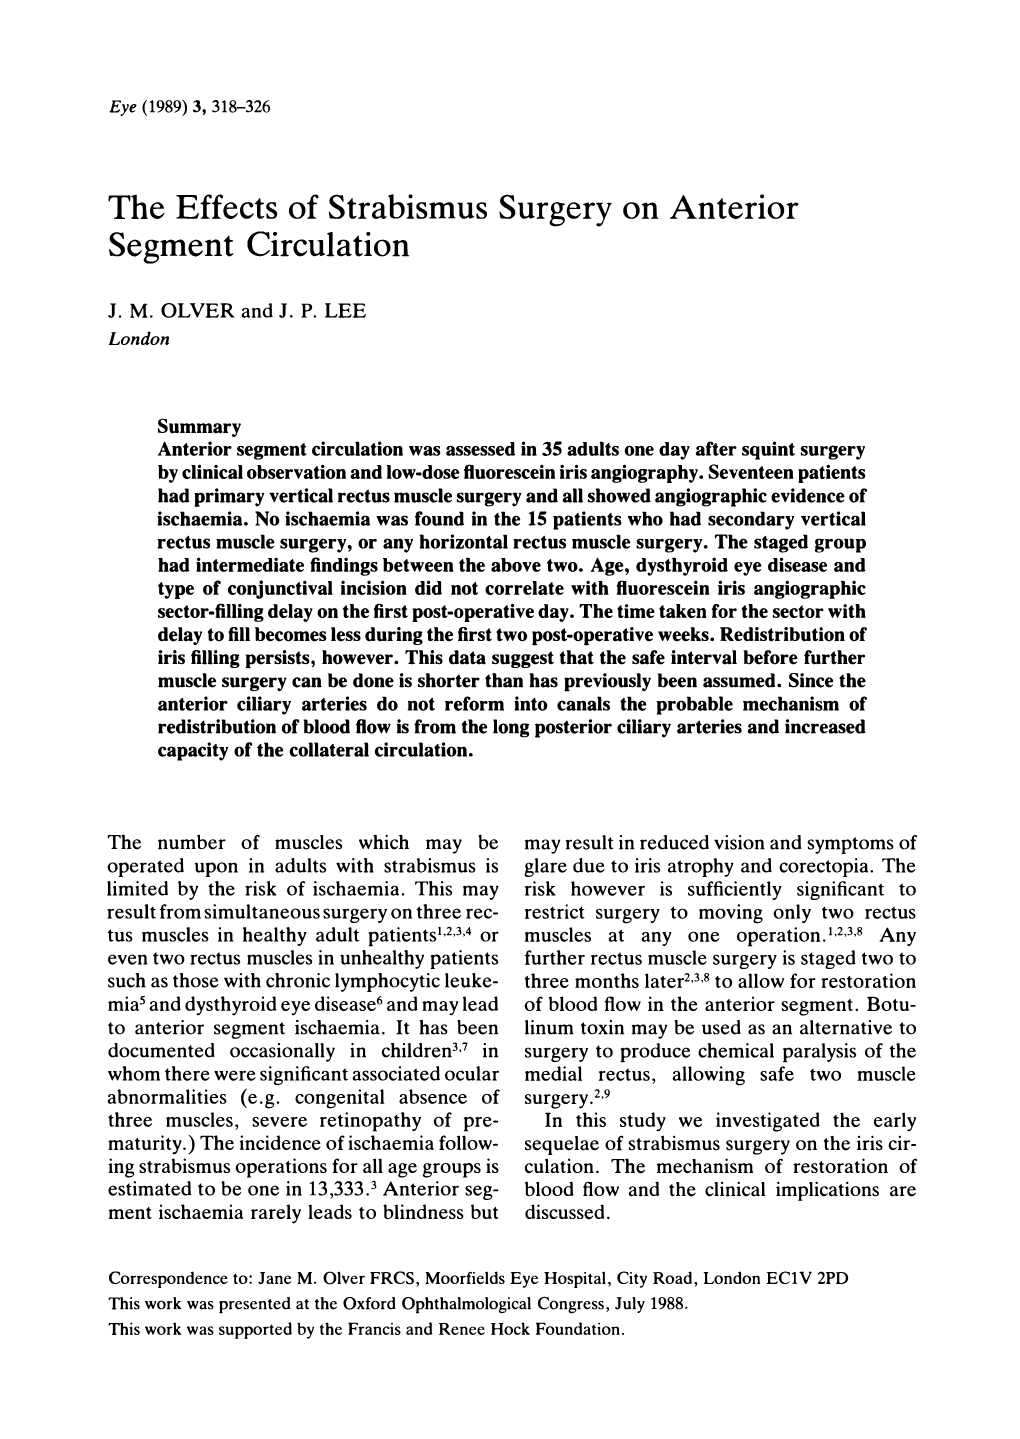 The Effects of Strabismus Surgery on Anterior Segment Circulation